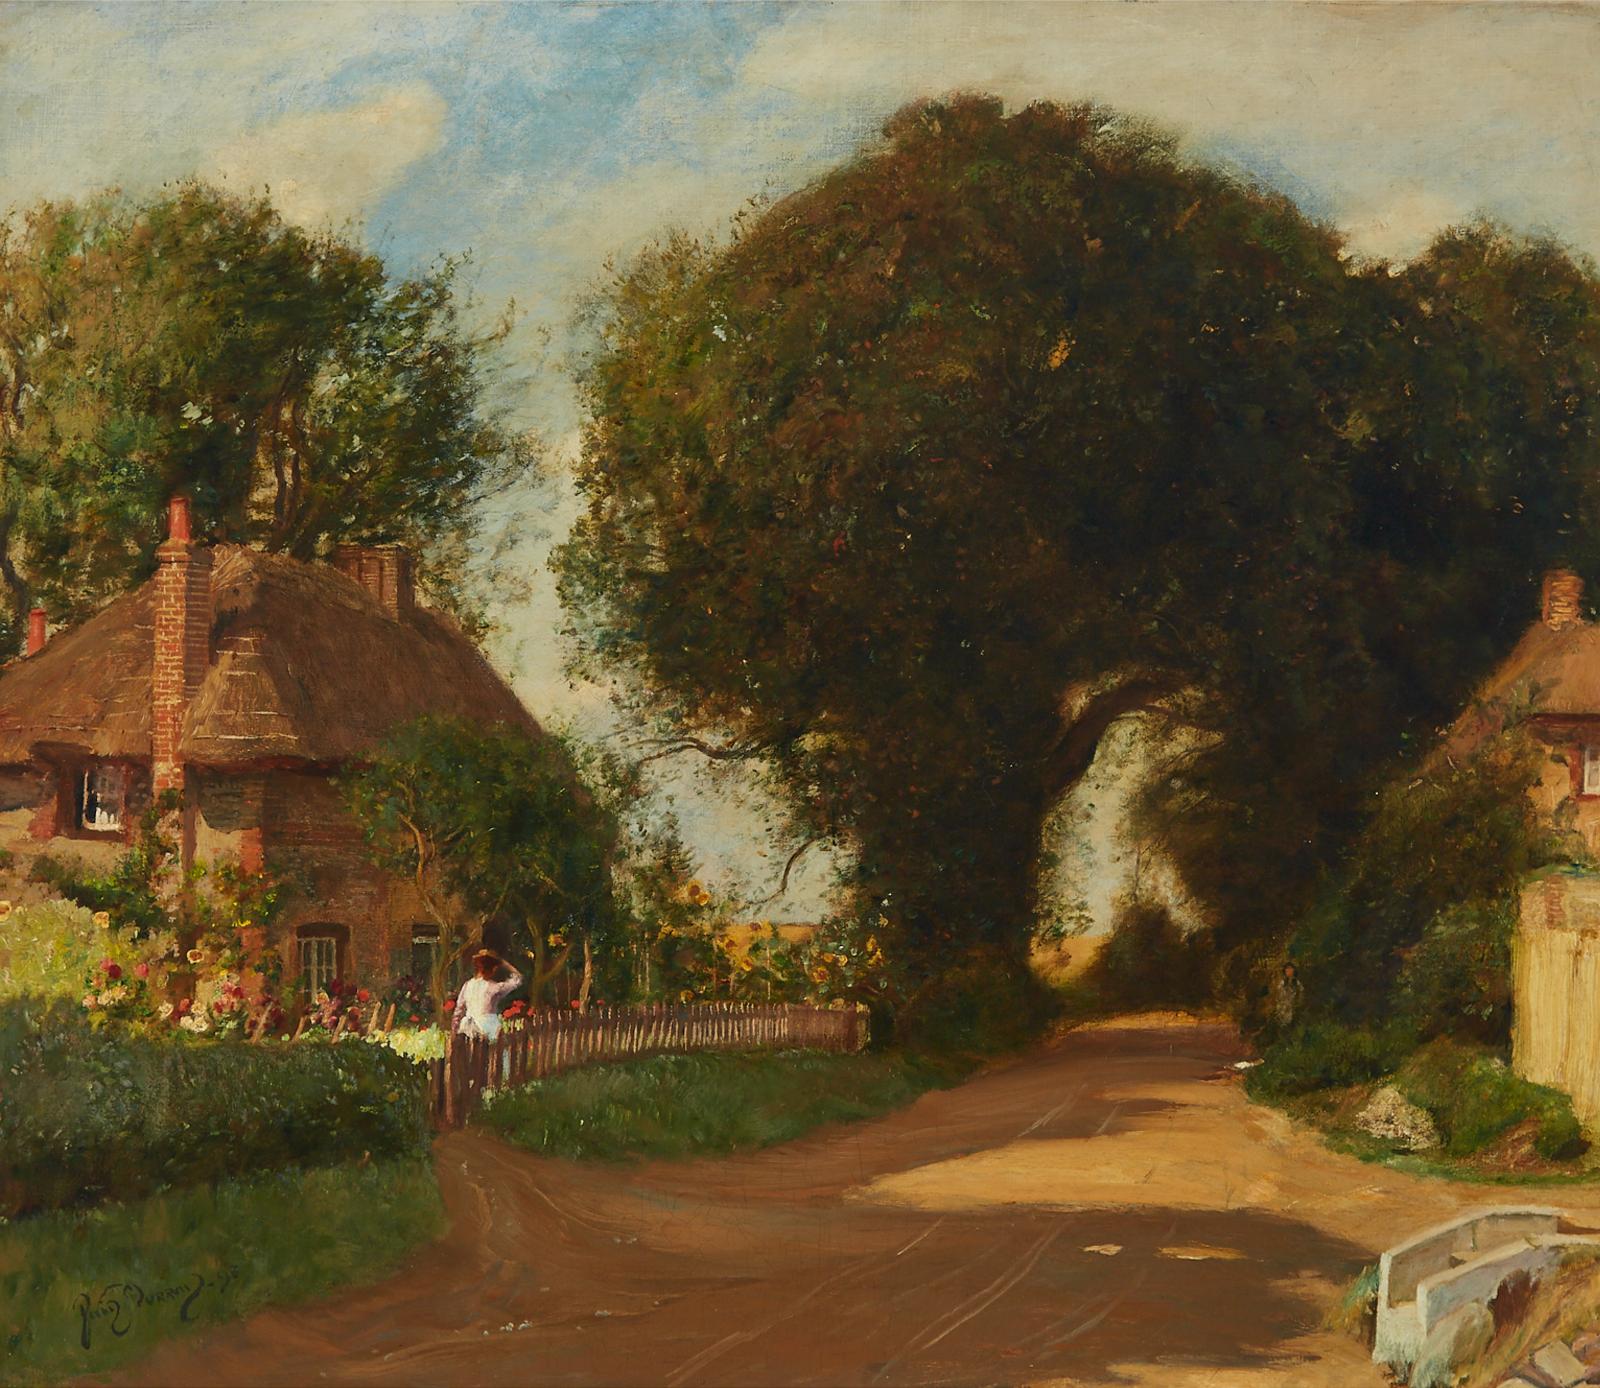 Sir David Murray (1849-1933) - In A Sussex Lane, 1896